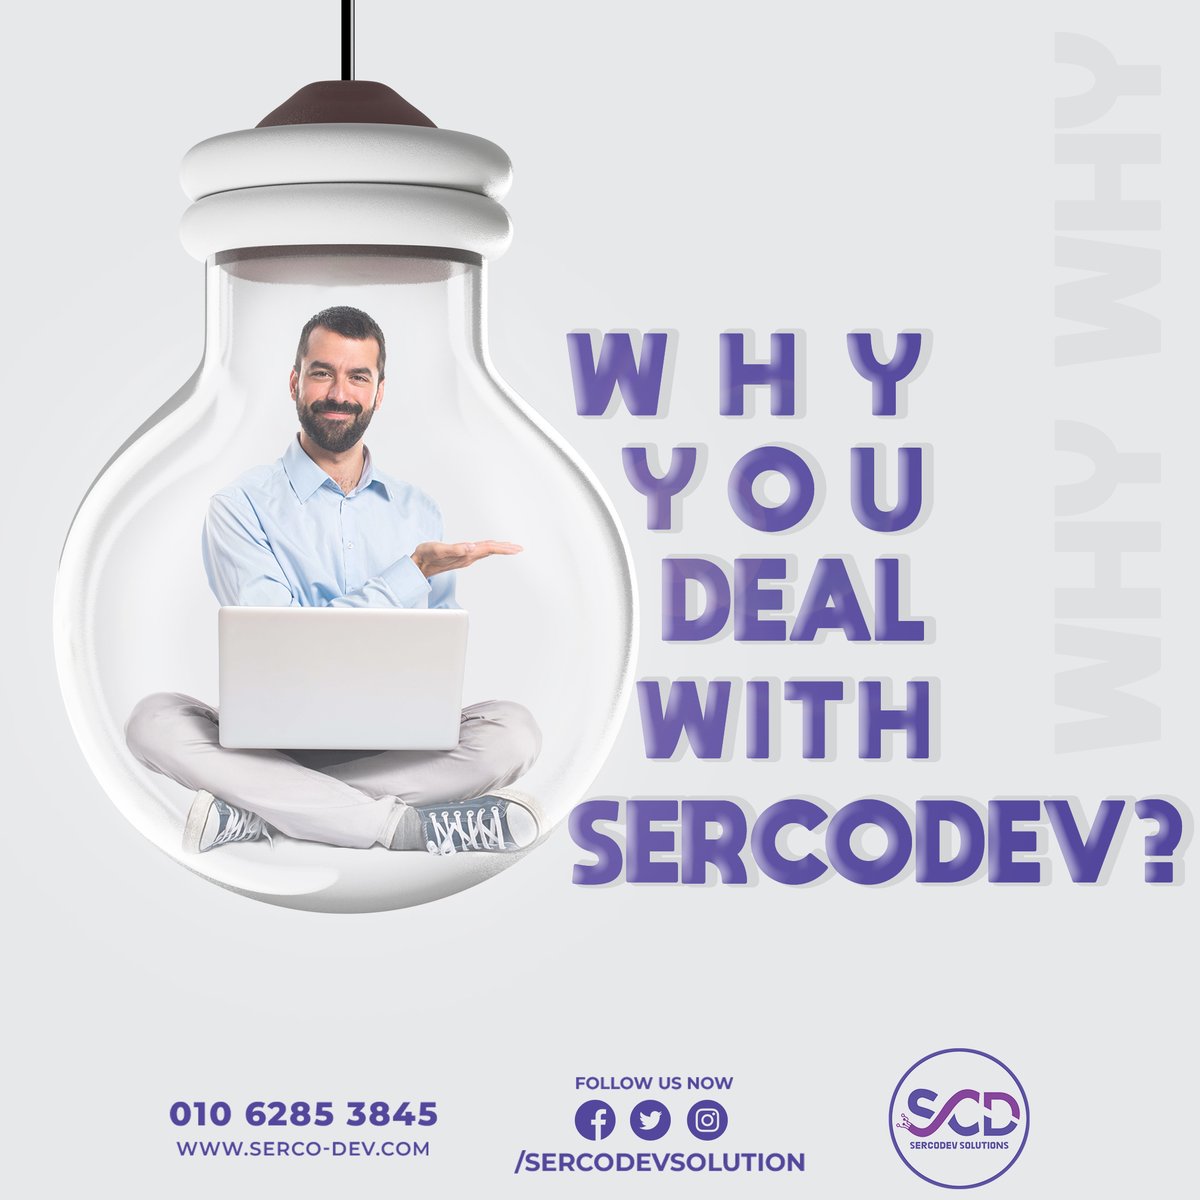 A new collection of social media designs for Sercodev software solutions co 😍
For more : behance.net/Ahm3dNass3r #graphicdesign #socialemedia #socialadvertising #socialmediadesign #socialmediapost #socialmediamarketing #socialmediapostdesign